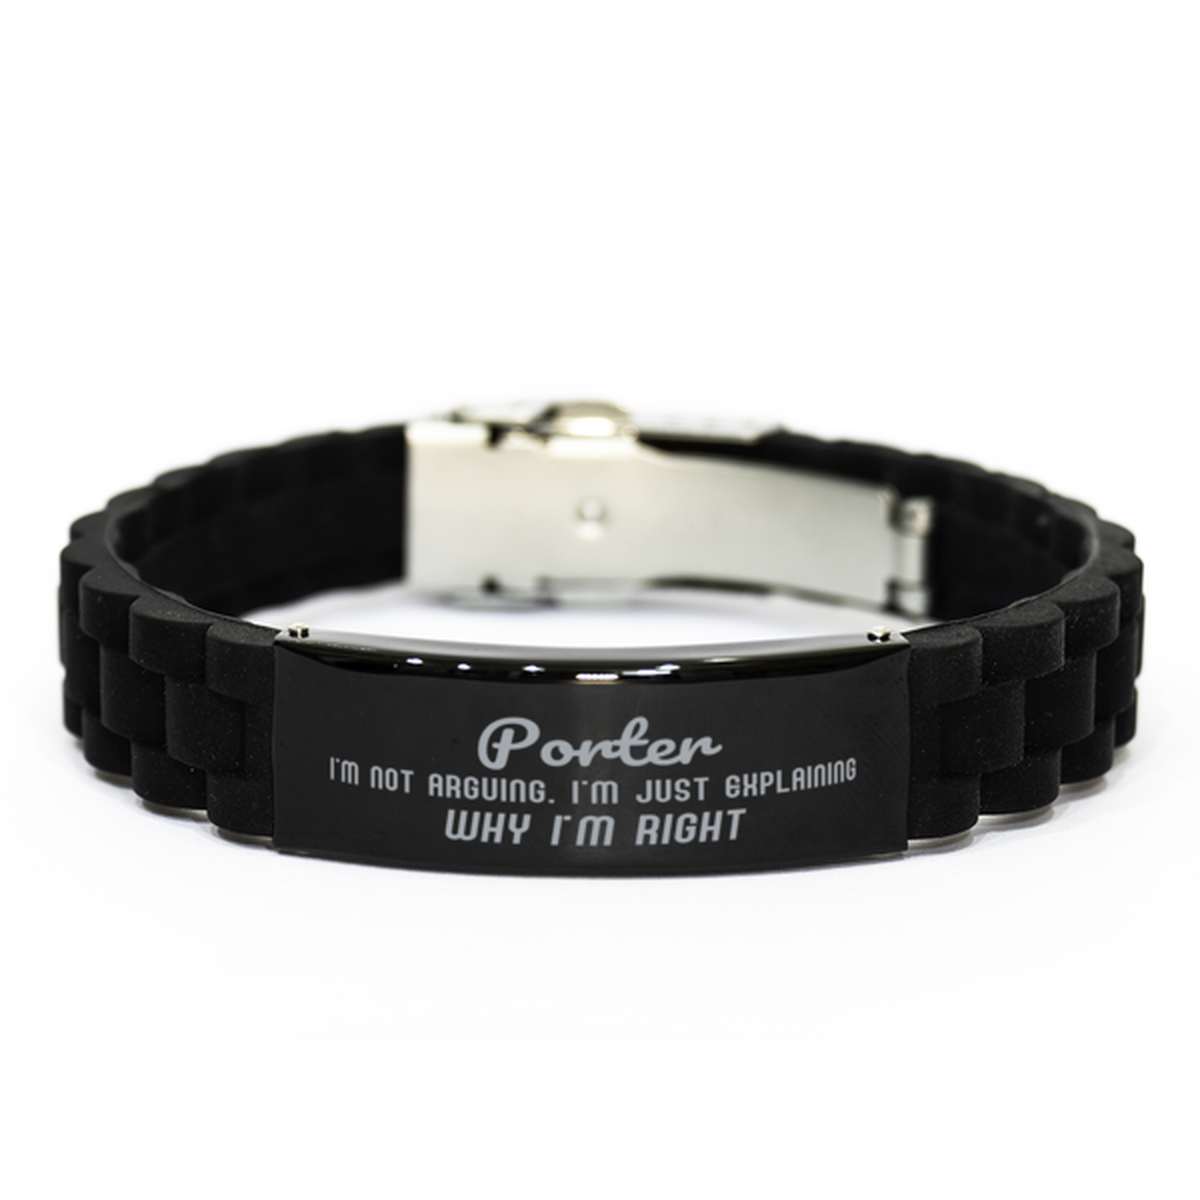 Porter I'm not Arguing. I'm Just Explaining Why I'm RIGHT Black Glidelock Clasp Bracelet, Funny Saying Quote Porter Gifts For Porter Graduation Birthday Christmas Gifts for Men Women Coworker